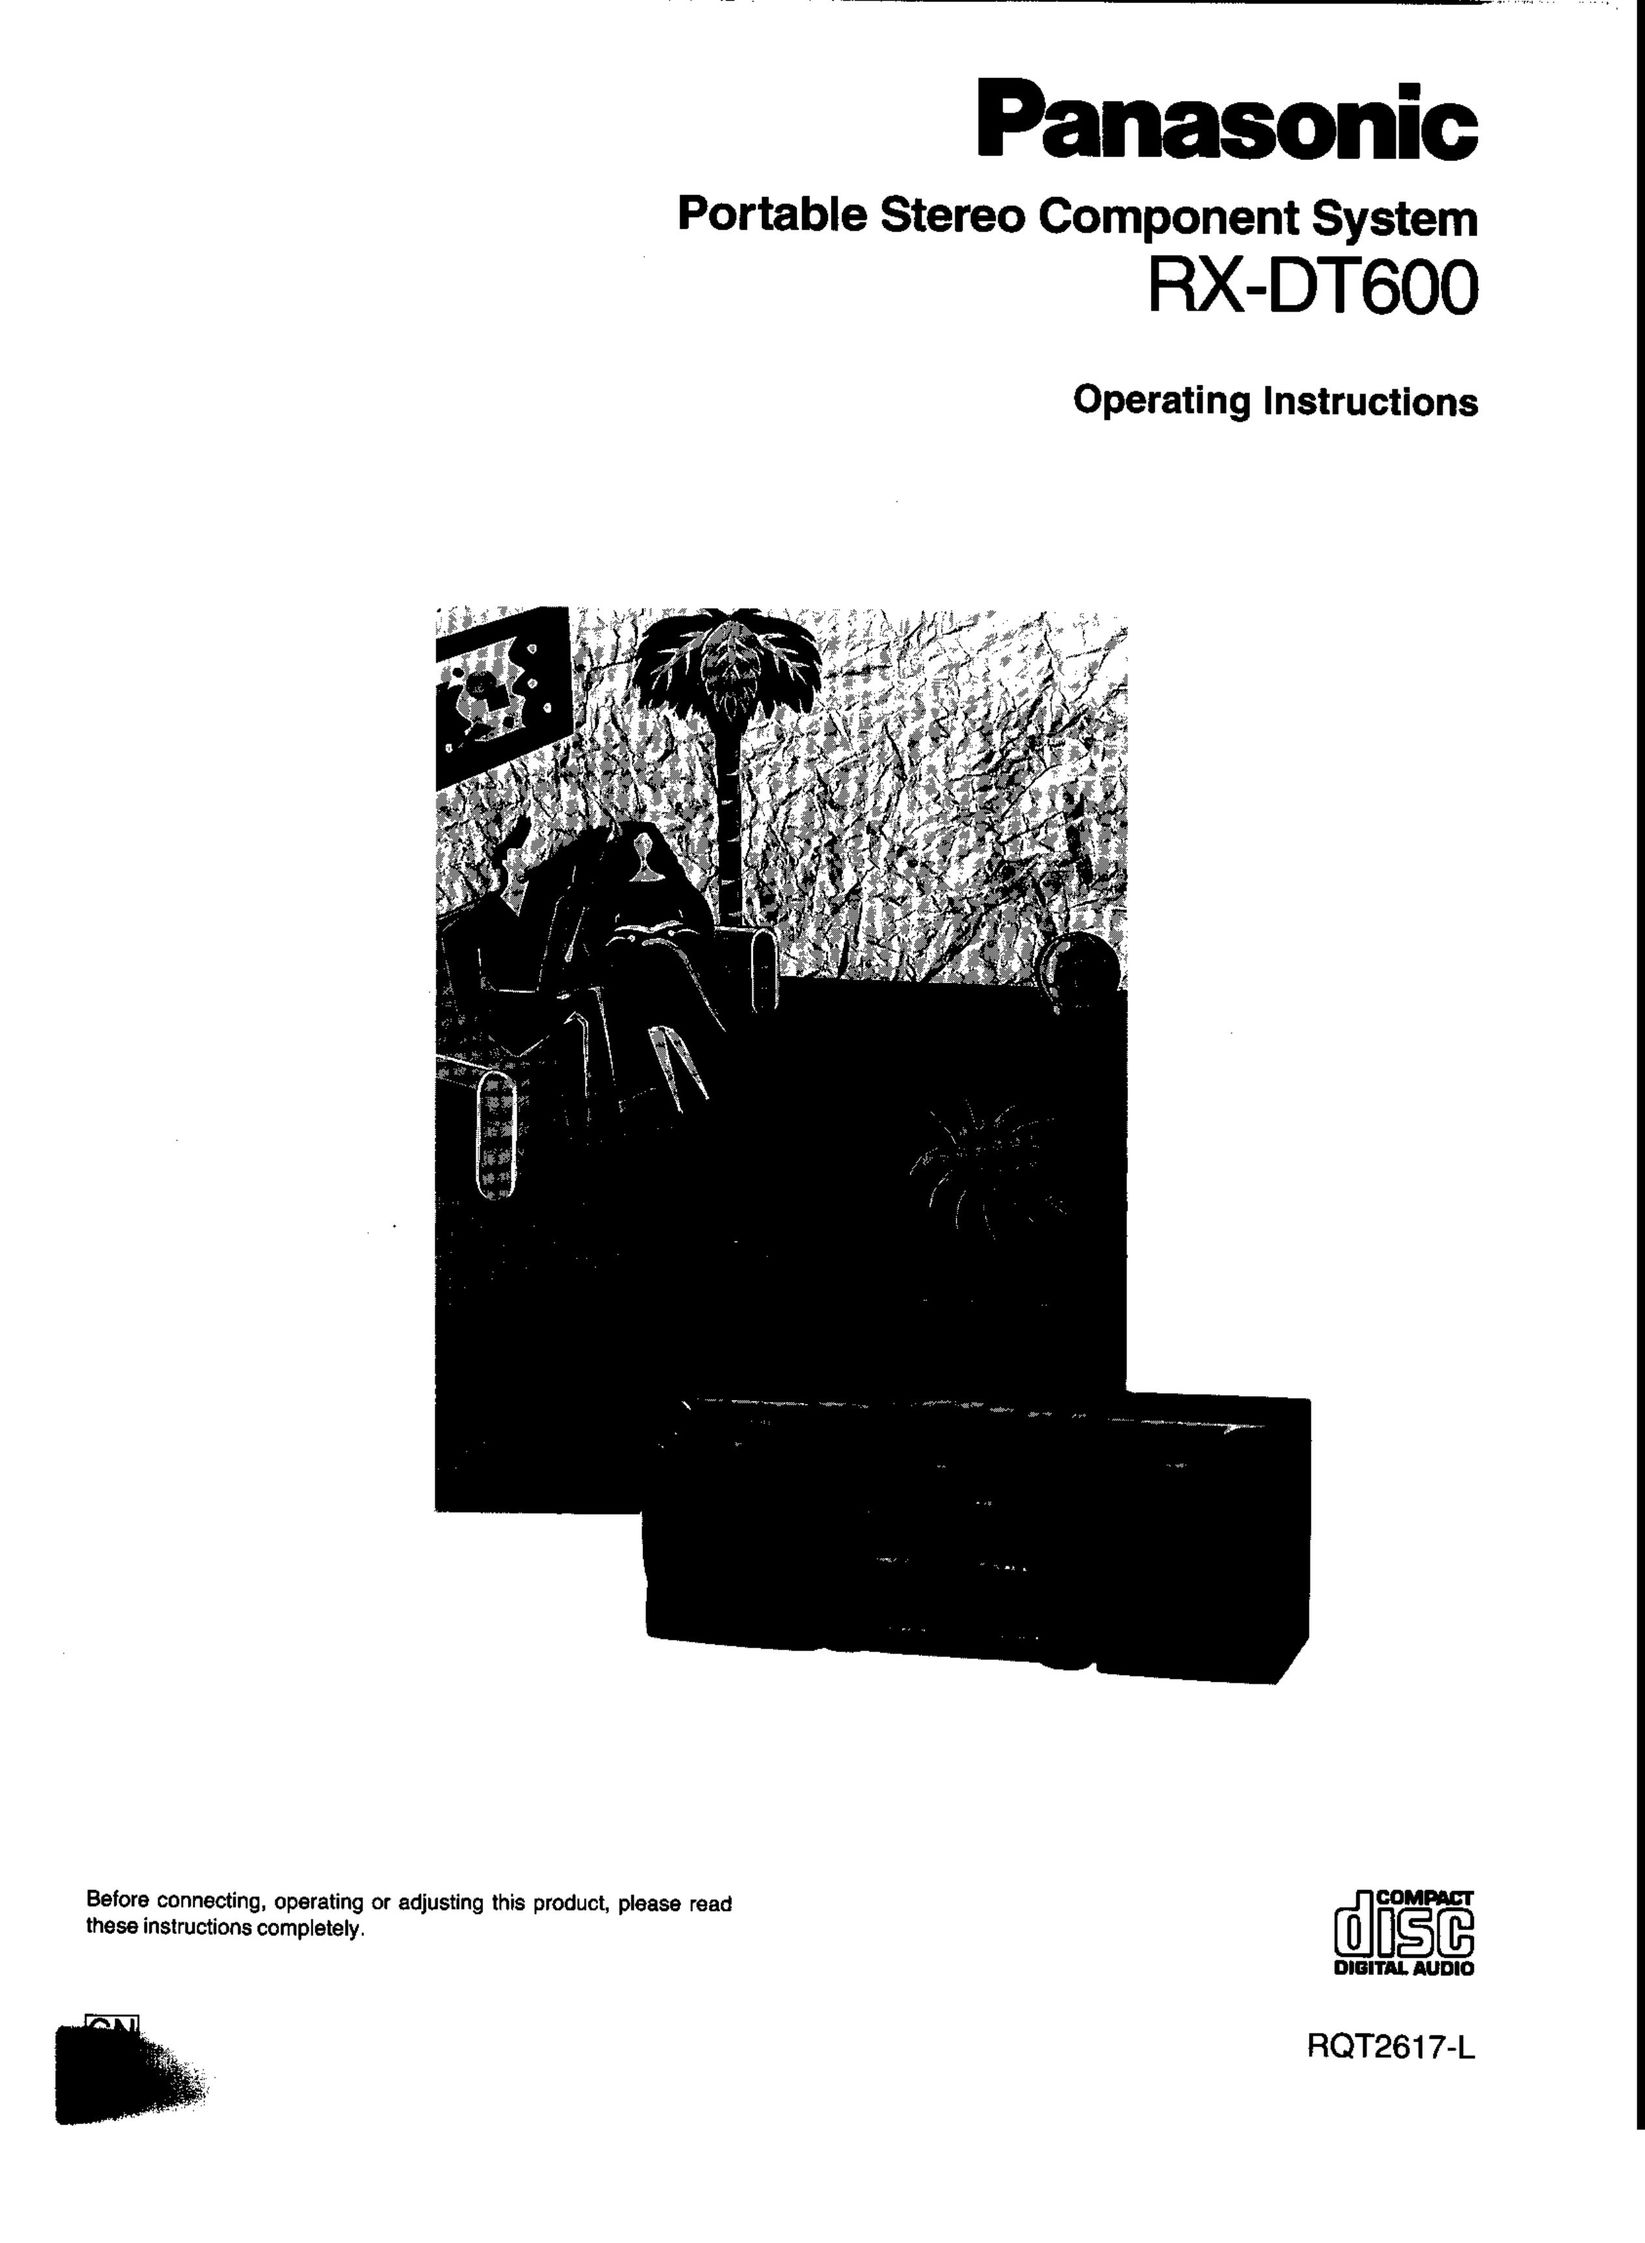 Panasonic RX-DT600 Stereo System User Manual